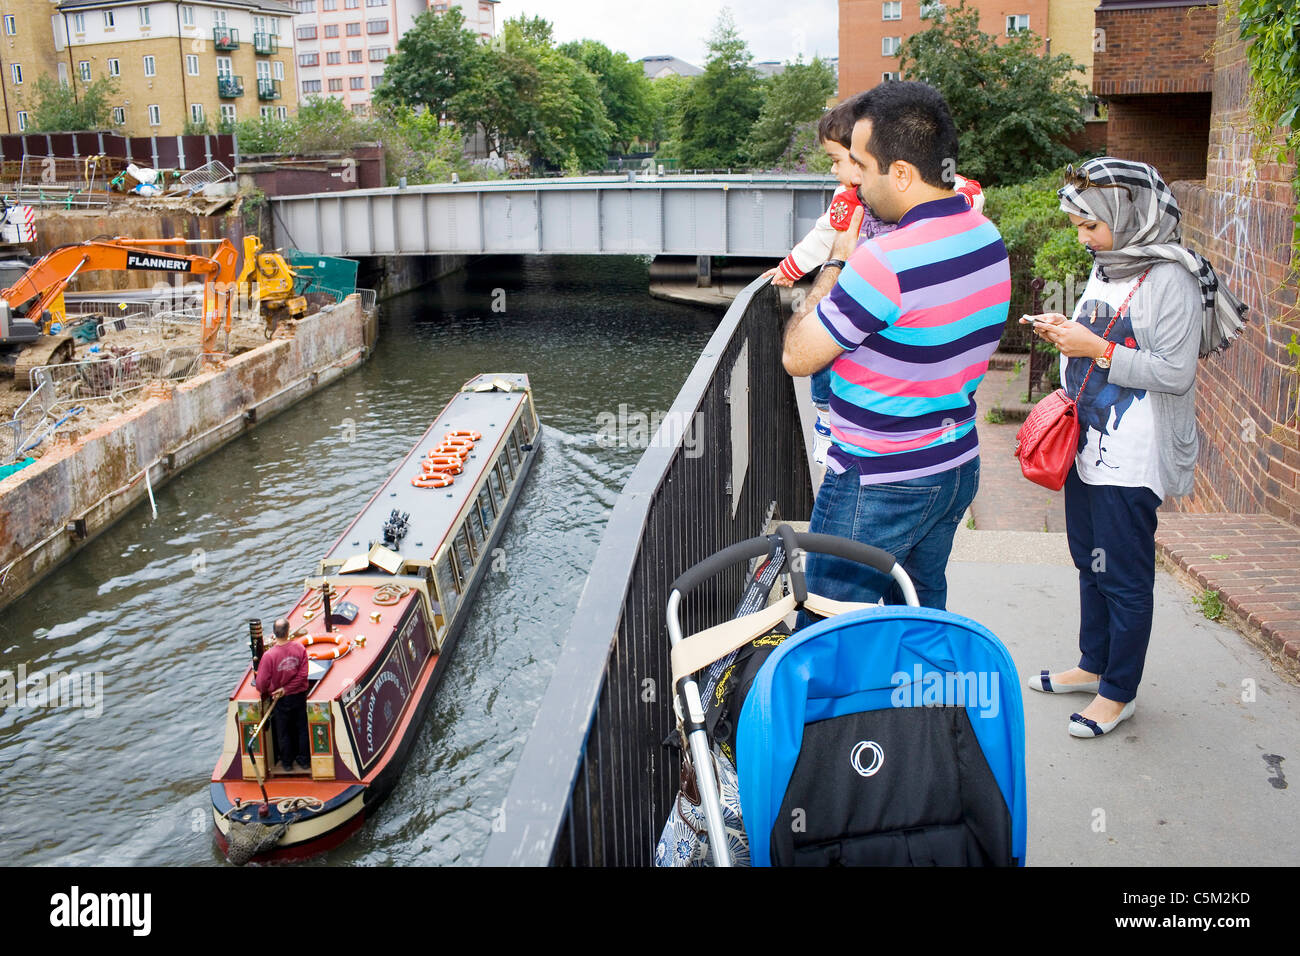 An family watch a boat pass on a London canal. Stock Photo